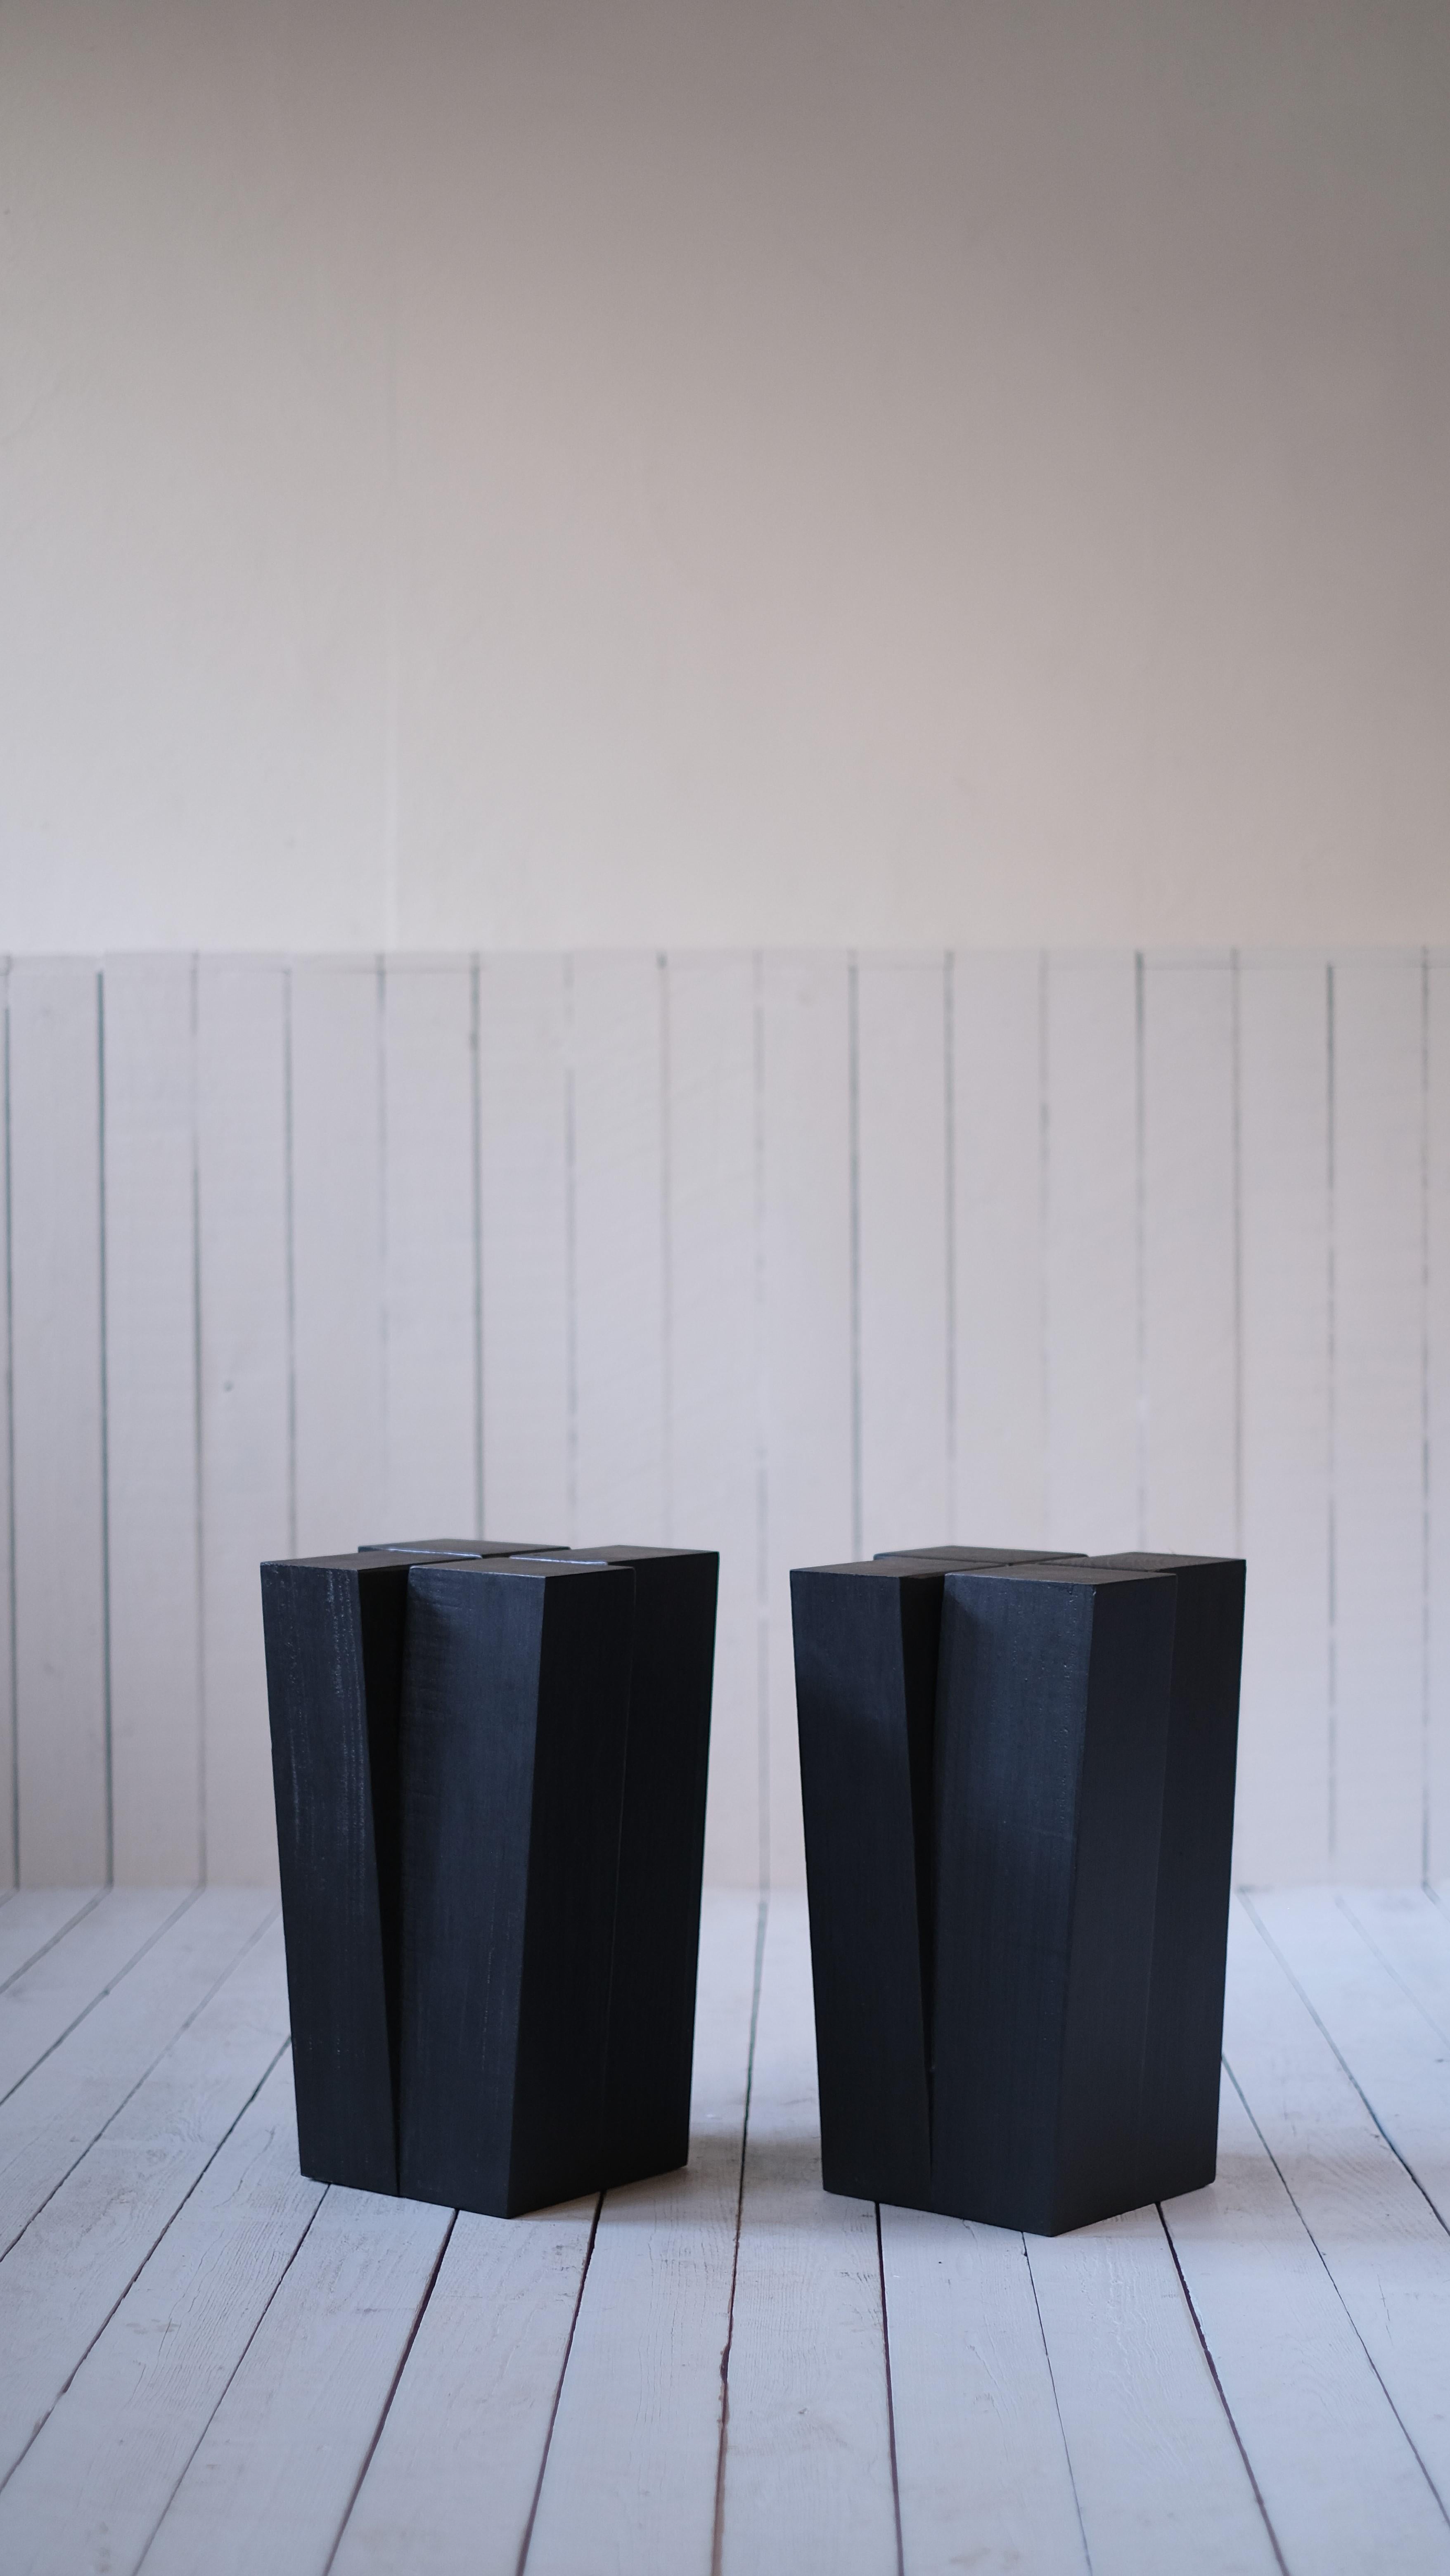 Four legs stool by Arno Declercq
Dimensions: D 32 x W 32 x H 50 cm
Materials: Burned and waxed Iroko wood

Signed by Arno Declercq

Arno Declercq
Belgian designer and art dealer who makes bespoke objects with passion for design, atmosphere, history